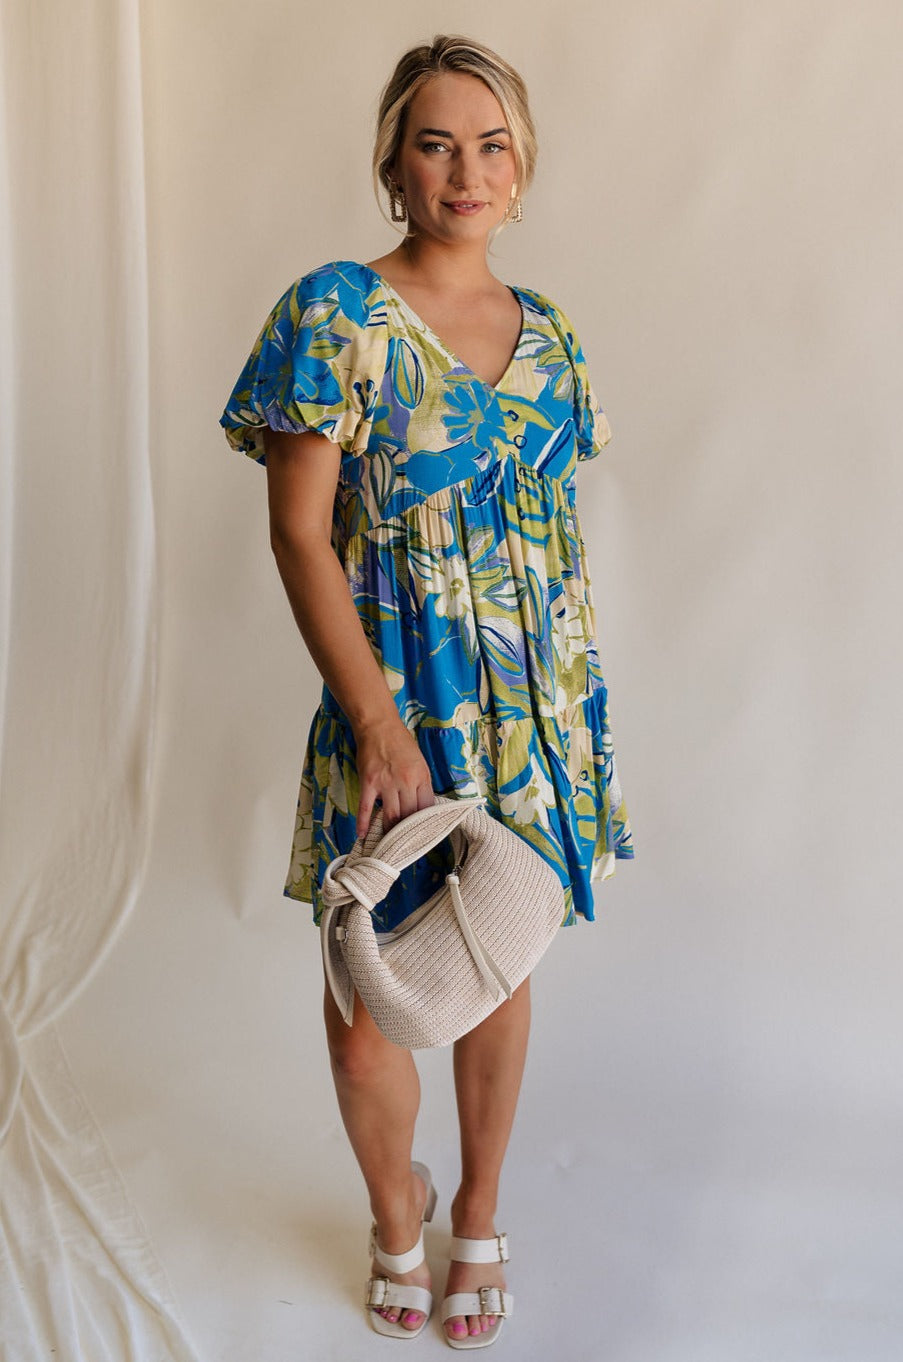 Full body view of female model wearing the Tessa Blue & Lime Green Floral Mini Dress which features Blue, Green and White Light Weight Fabric, Floral Print, Mini Length, Tiered Body, Blue Lining, V-Neckline and Short Puff Sleeves